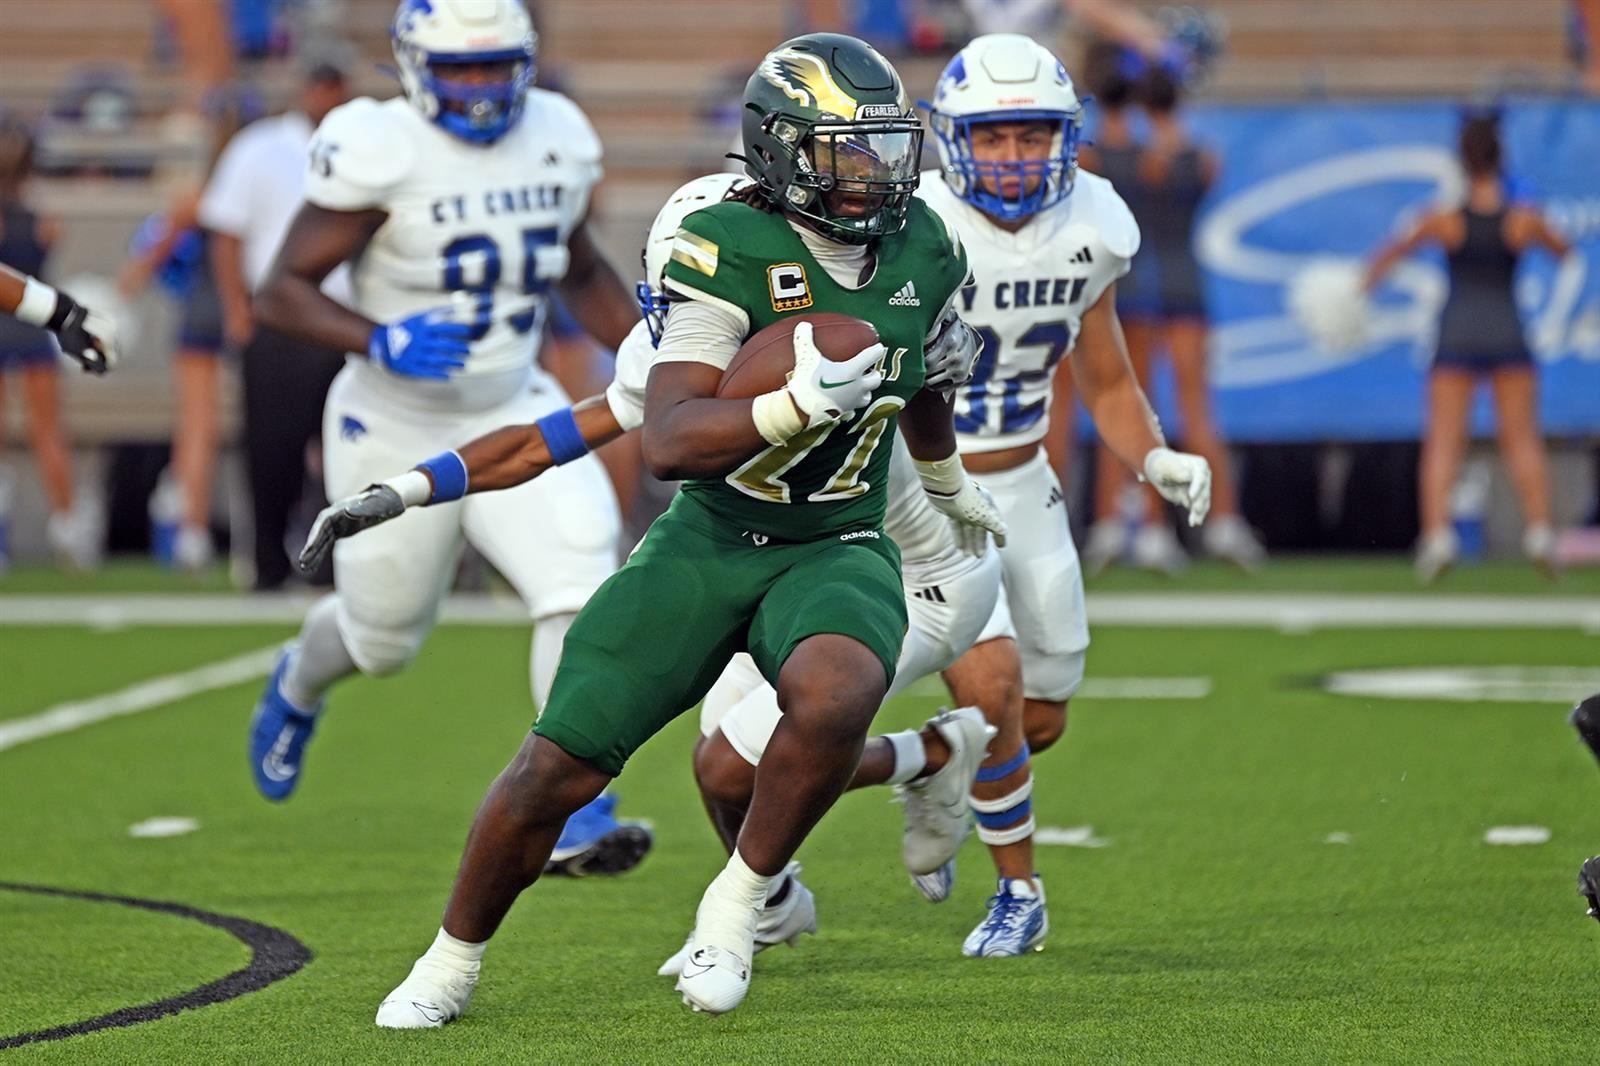 Cy Falls High School senior running back Trey Morris was voted District 16-6A Offensive MVP for a second season in a row.